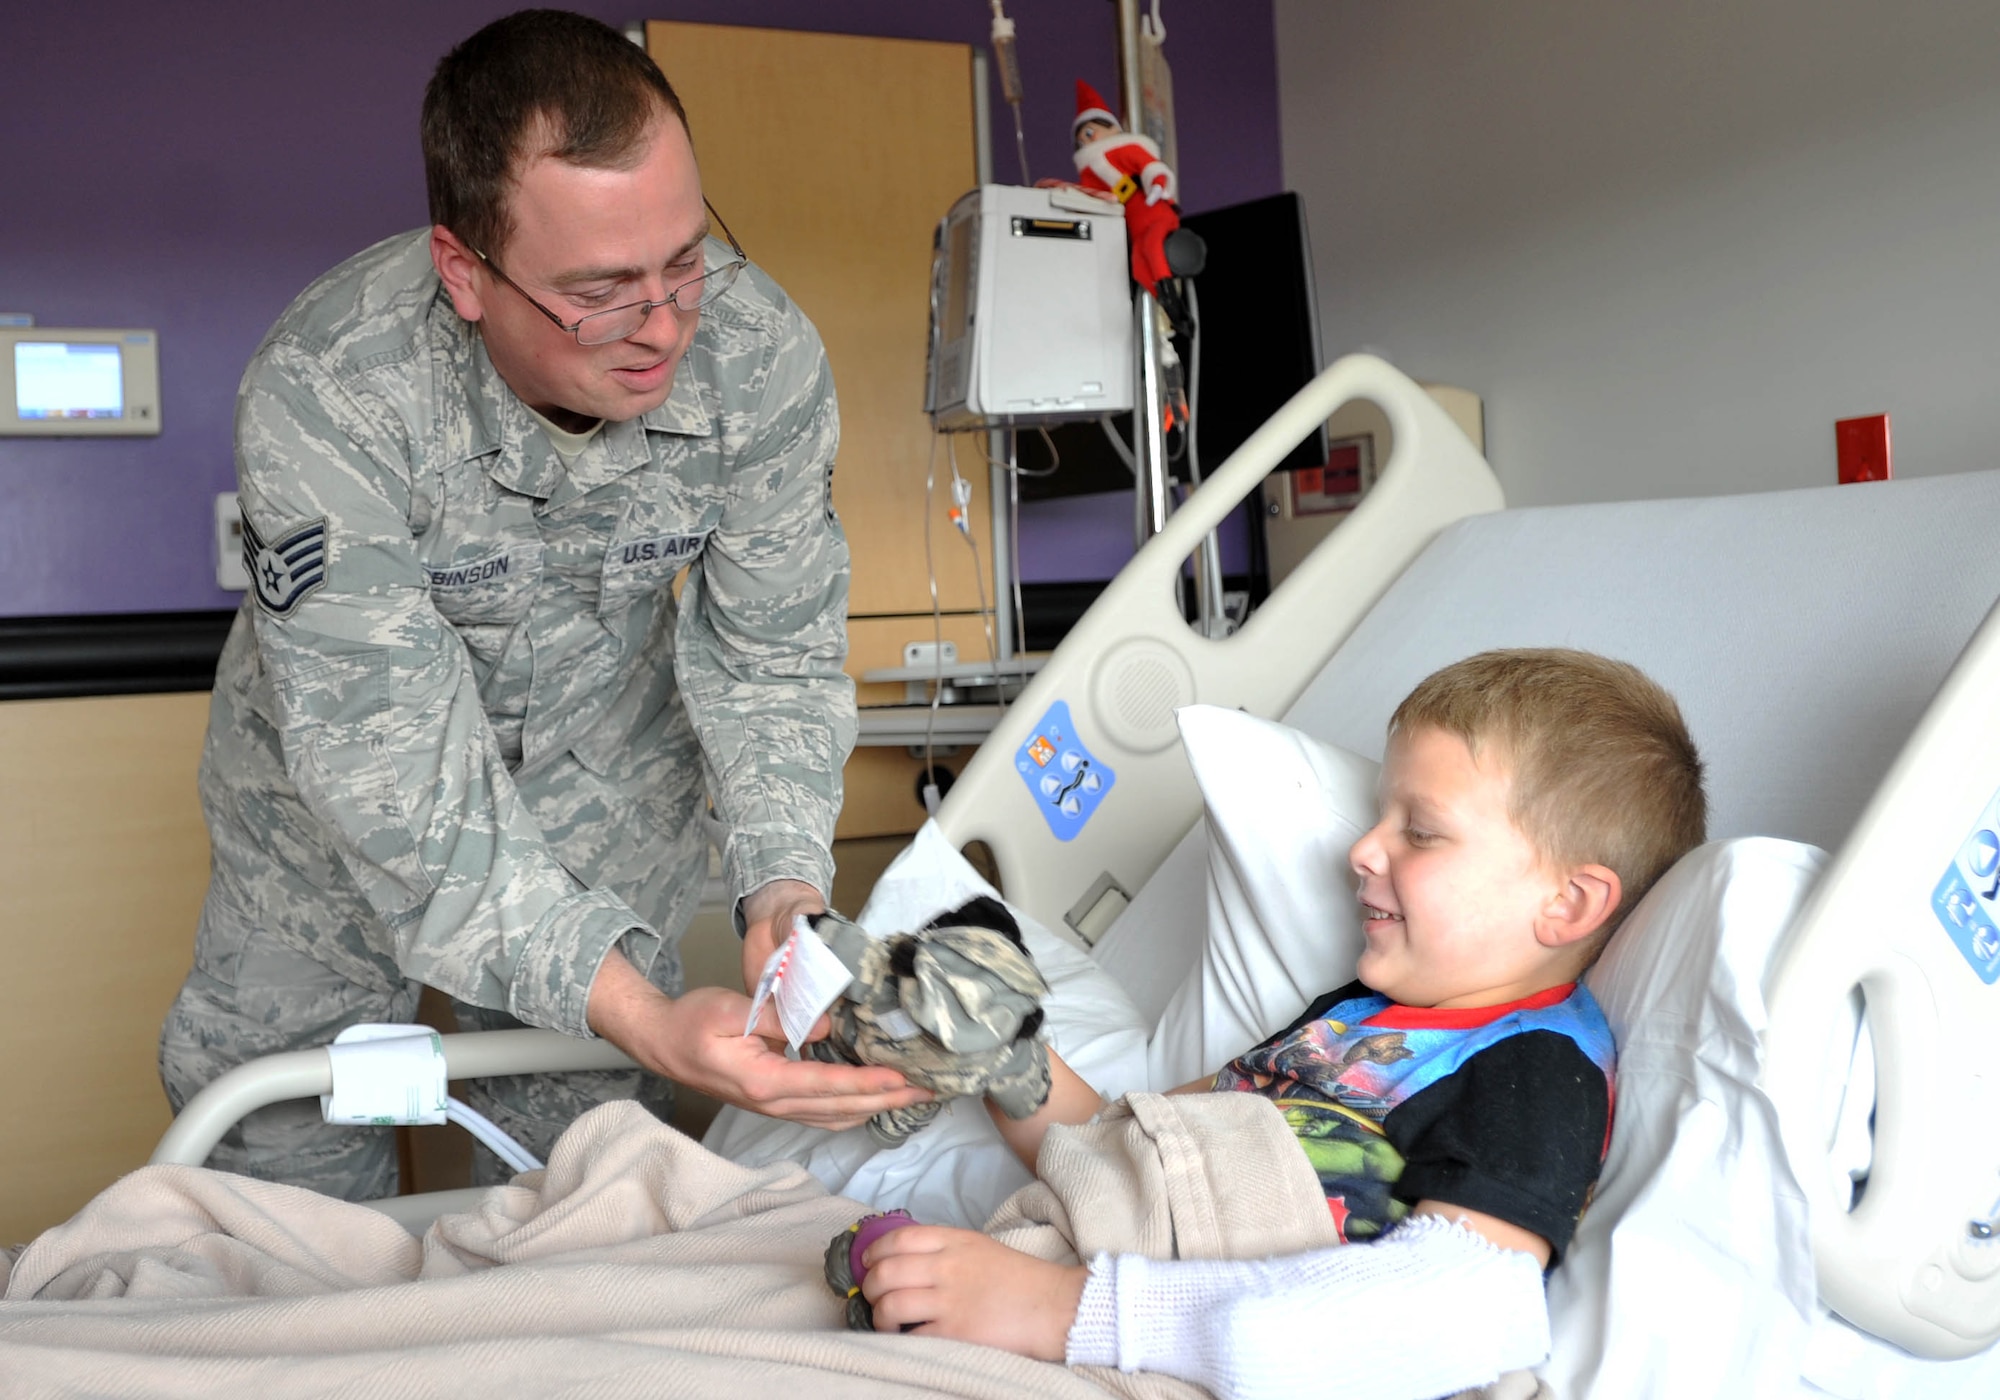 Staff Sgt. Jeremy Robinson, 373rd Training Squadron, Det. 8 KC-46 Pegasus and KC-135 Stratotanker hydraulic instructor, hands a military teddy bear to a child Dec. 18, 2018, at Wesley Children’s Hospital. The members wanted to spread some cheer to children right before the holidays to brighten their mood and make the stay at the hospital a little better. (U.S. Air Force photo by Staff Sgt. David Bernal Del Agua)